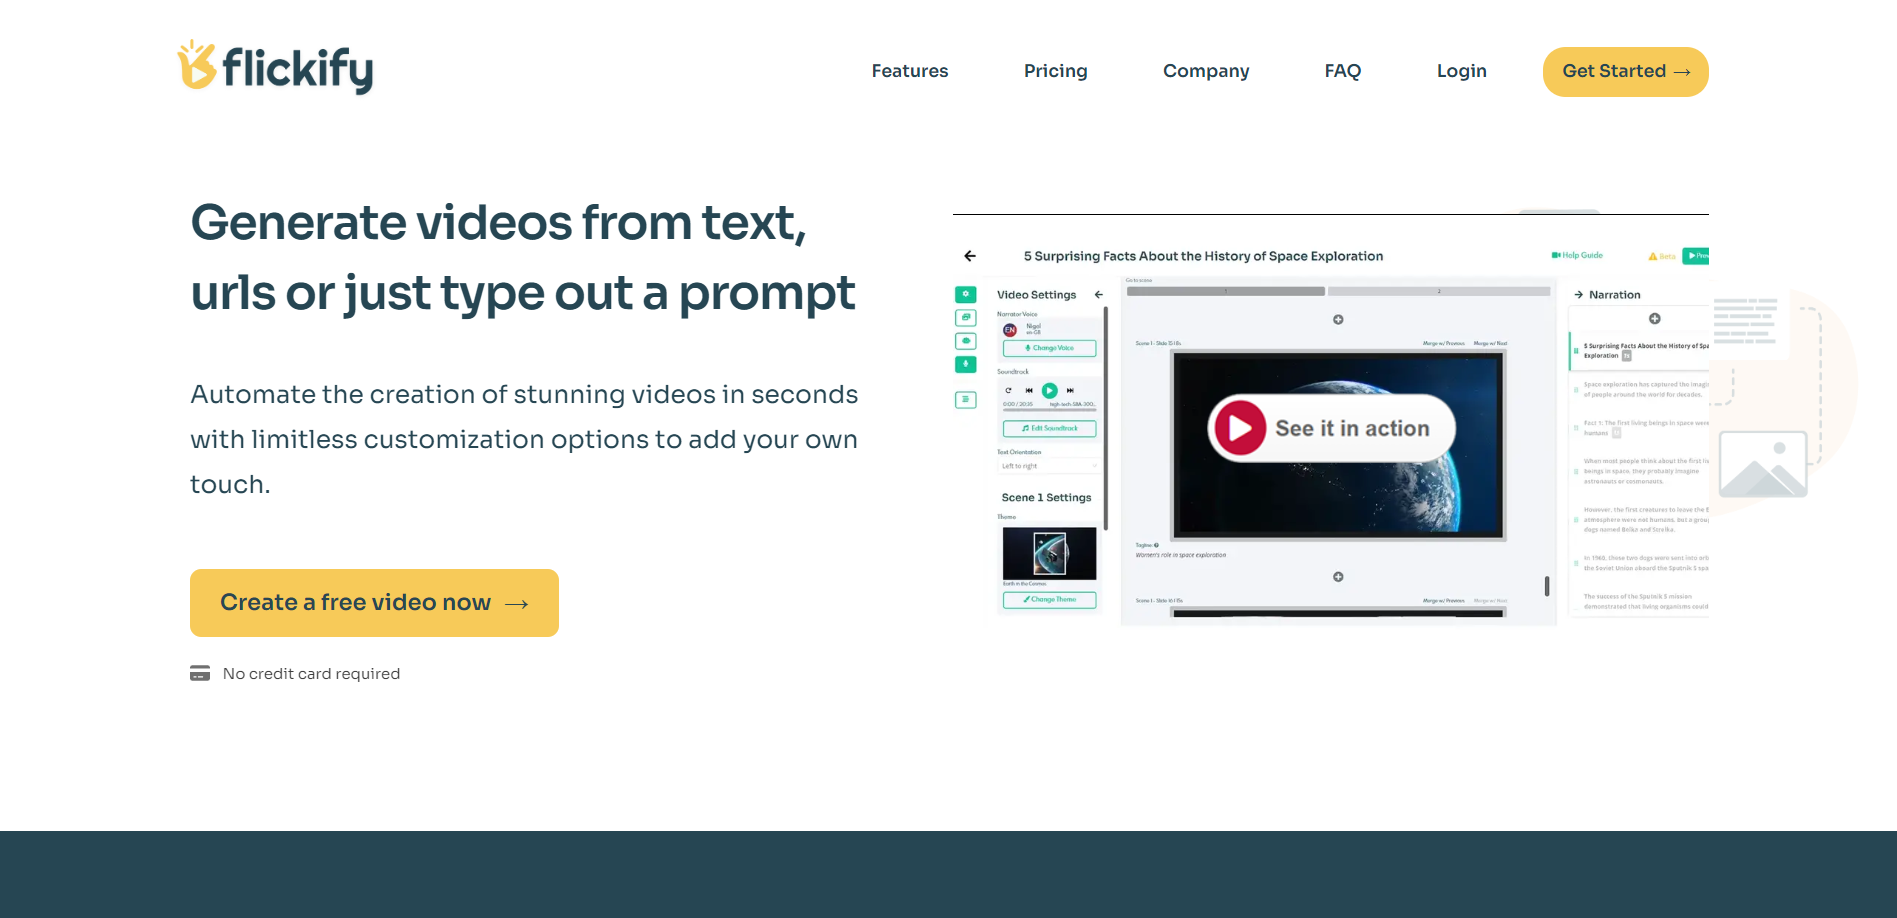 FlickifyFlickify transforms articles blogs and text into professional videos effortlessly